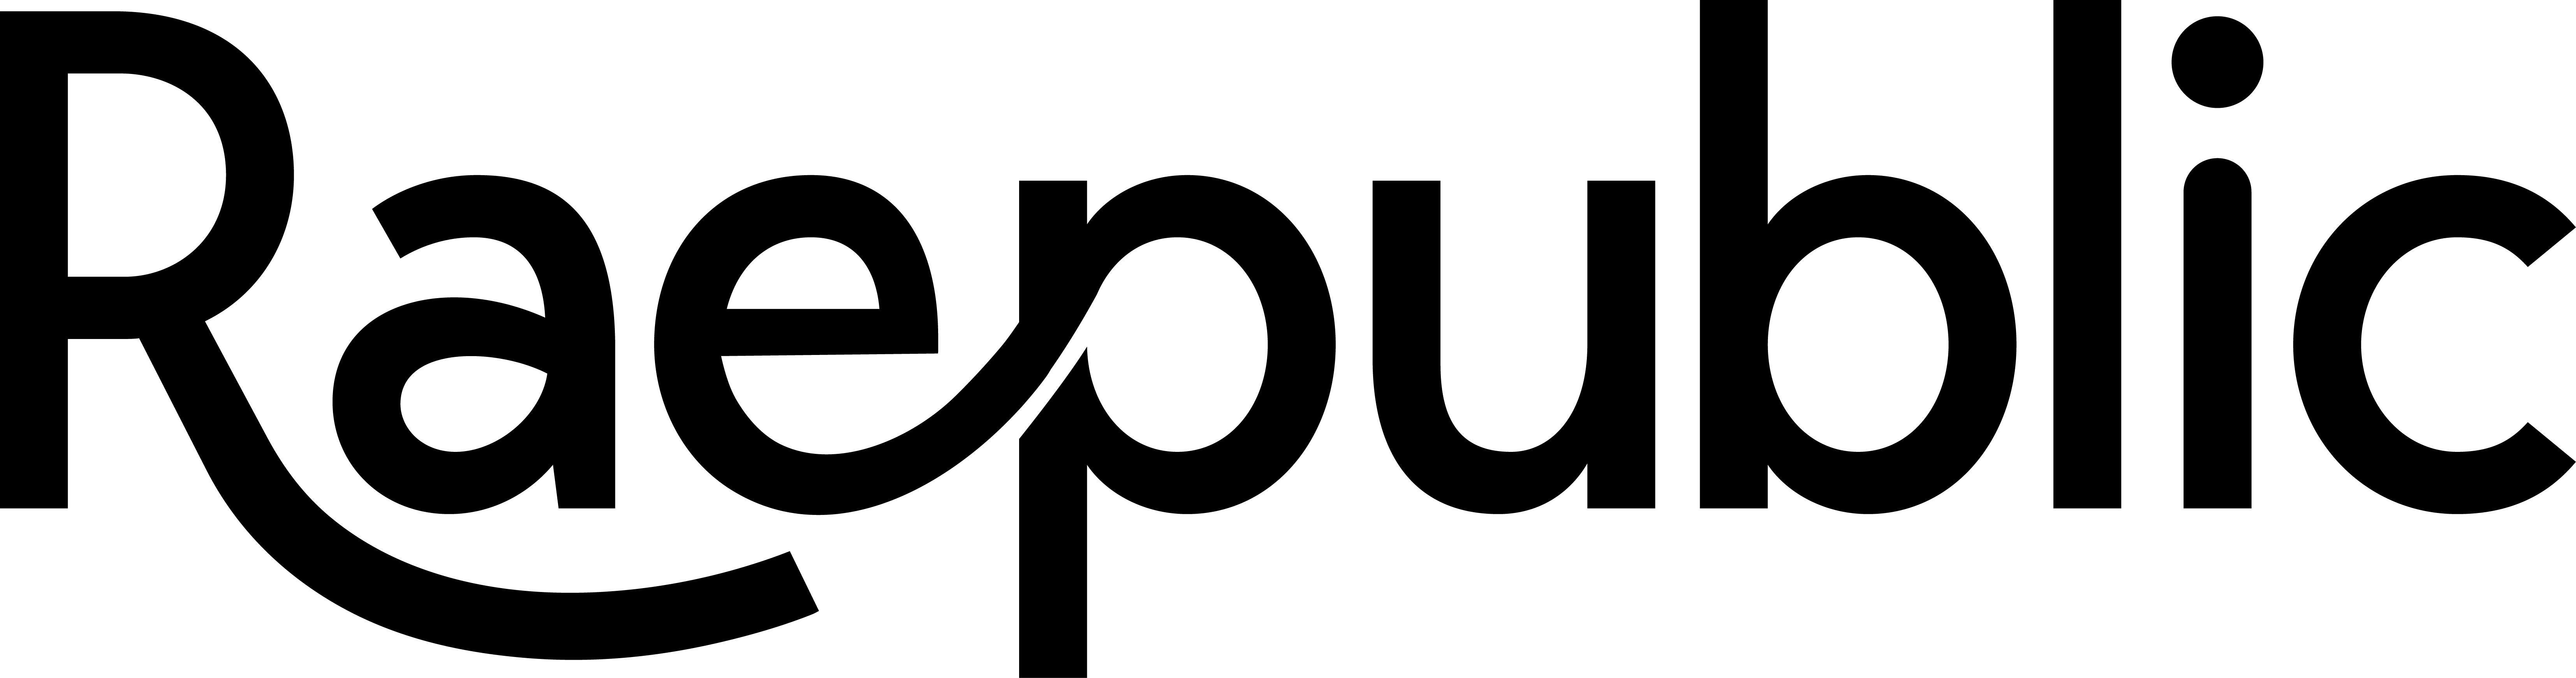 Black text logo with stylized lettering spelling "raepublic".